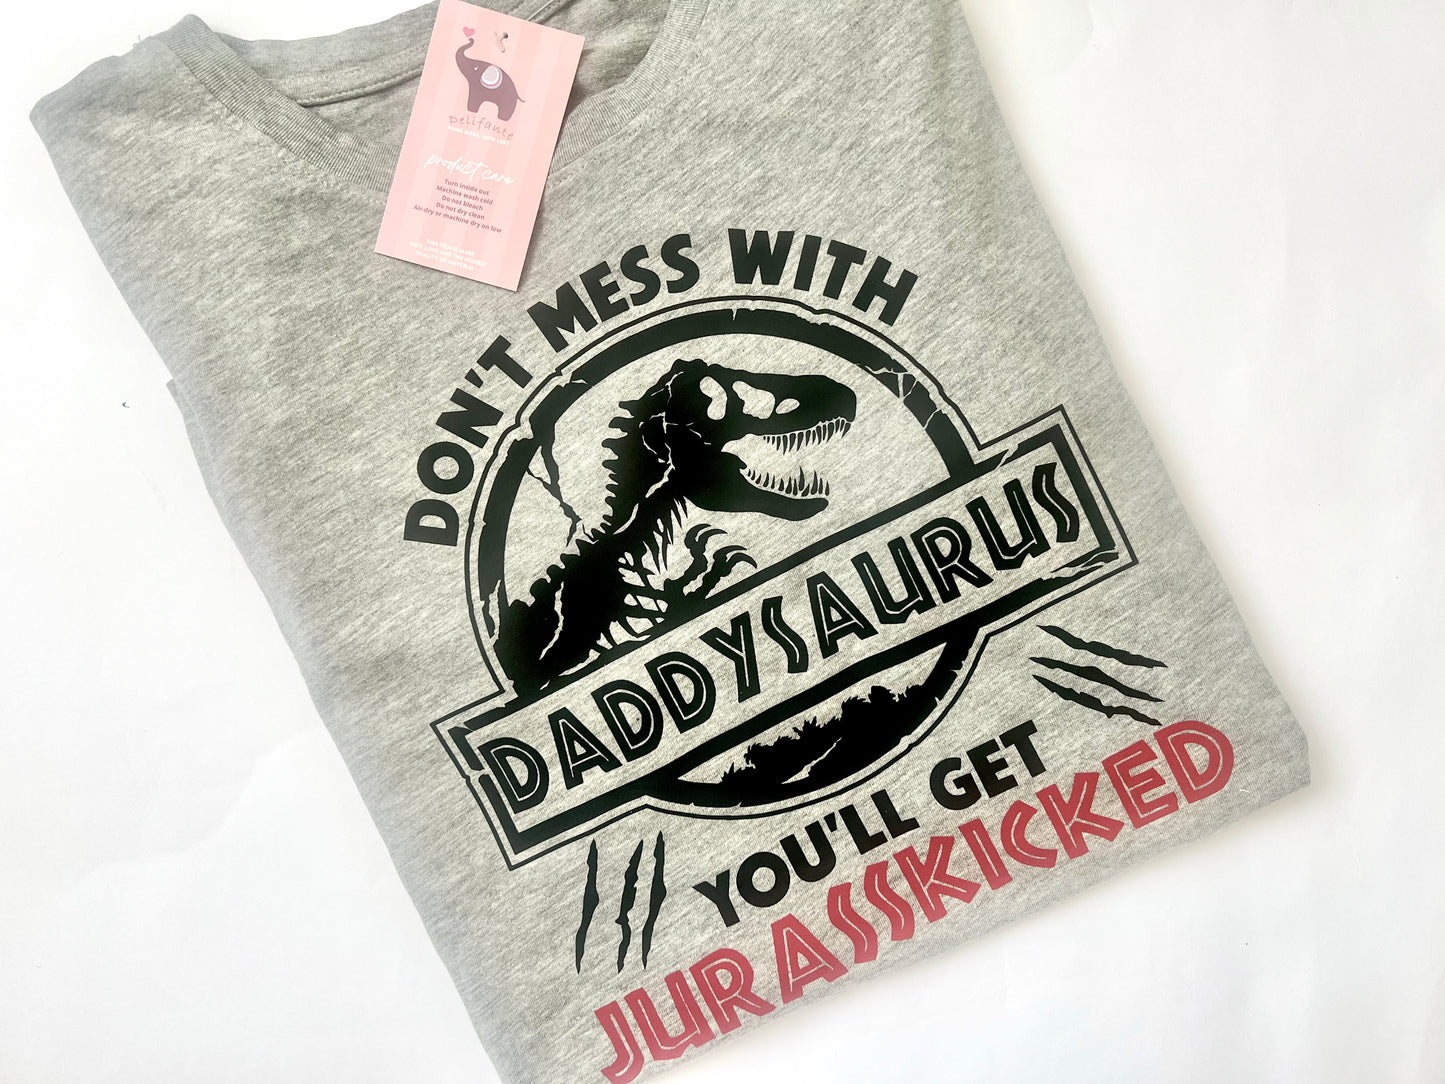 “DADDYSAURUS” Fathers Day T-Shirt